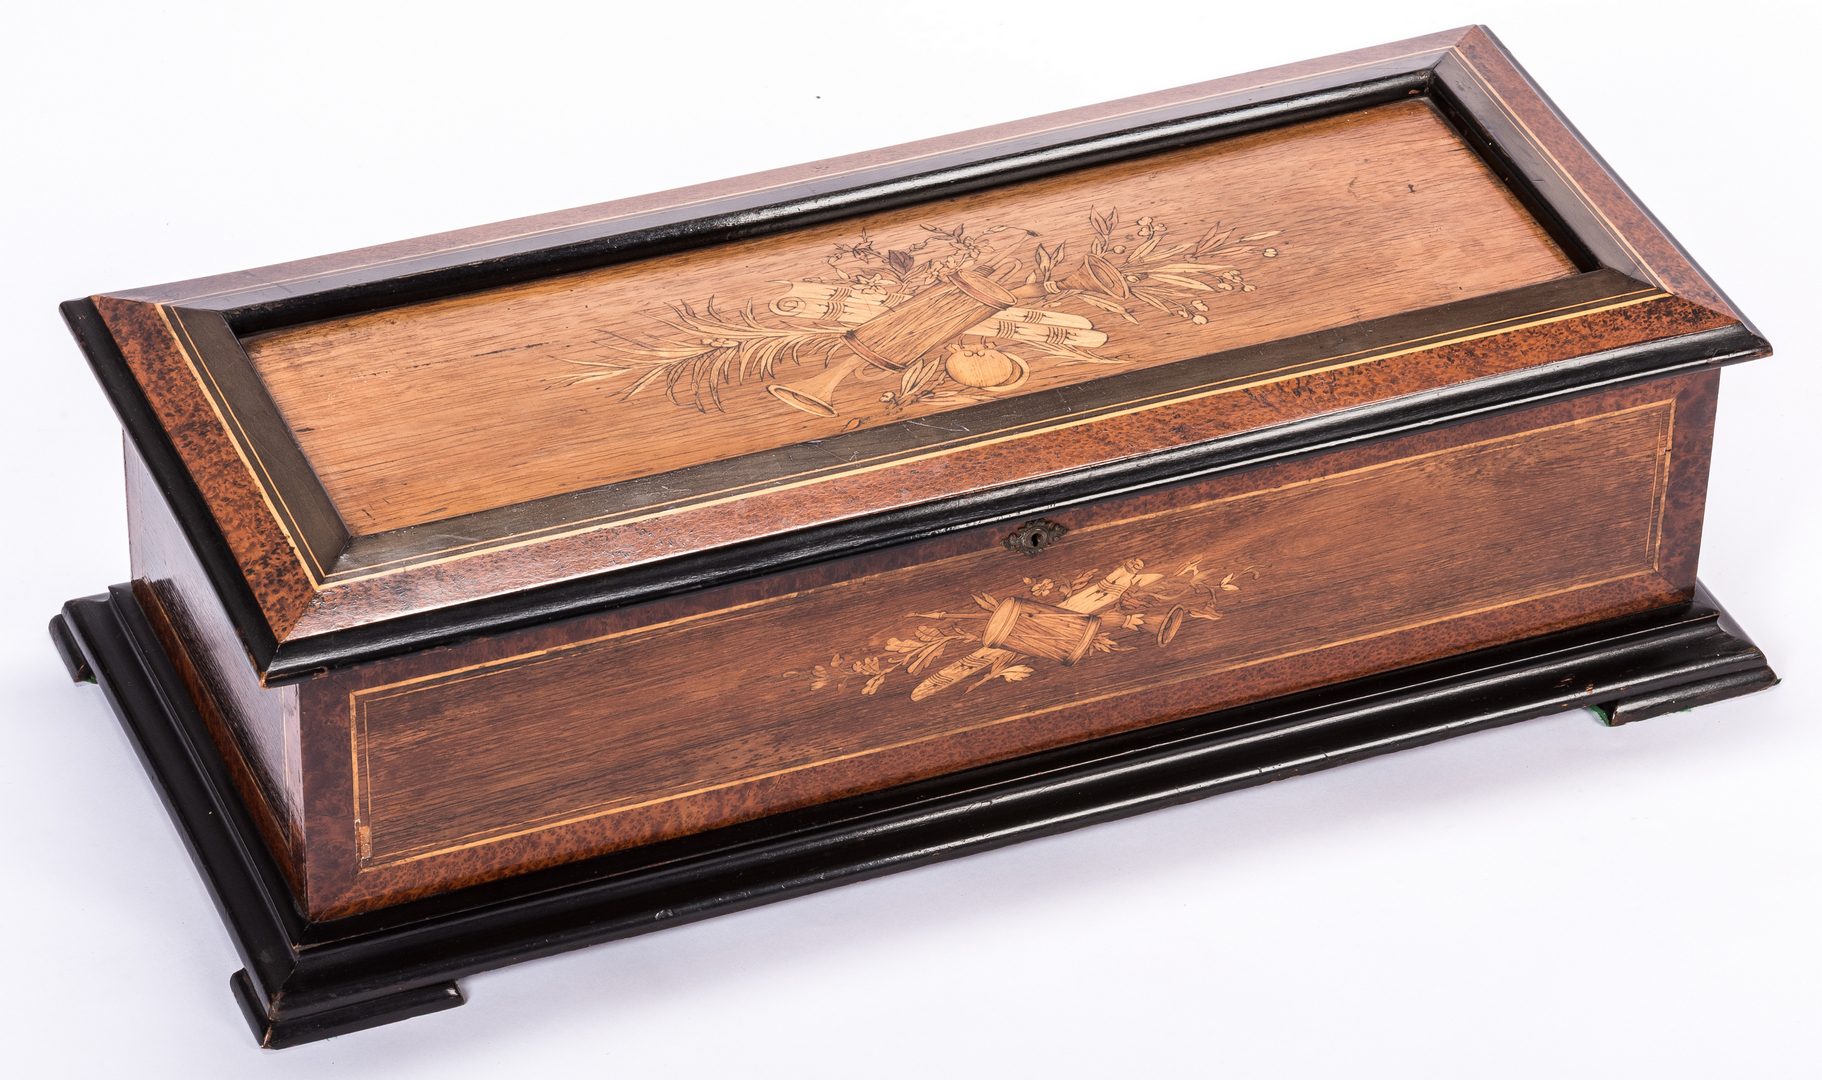 Lot 784: Swiss Cylinder Music Box w/ Marquetry Inlay